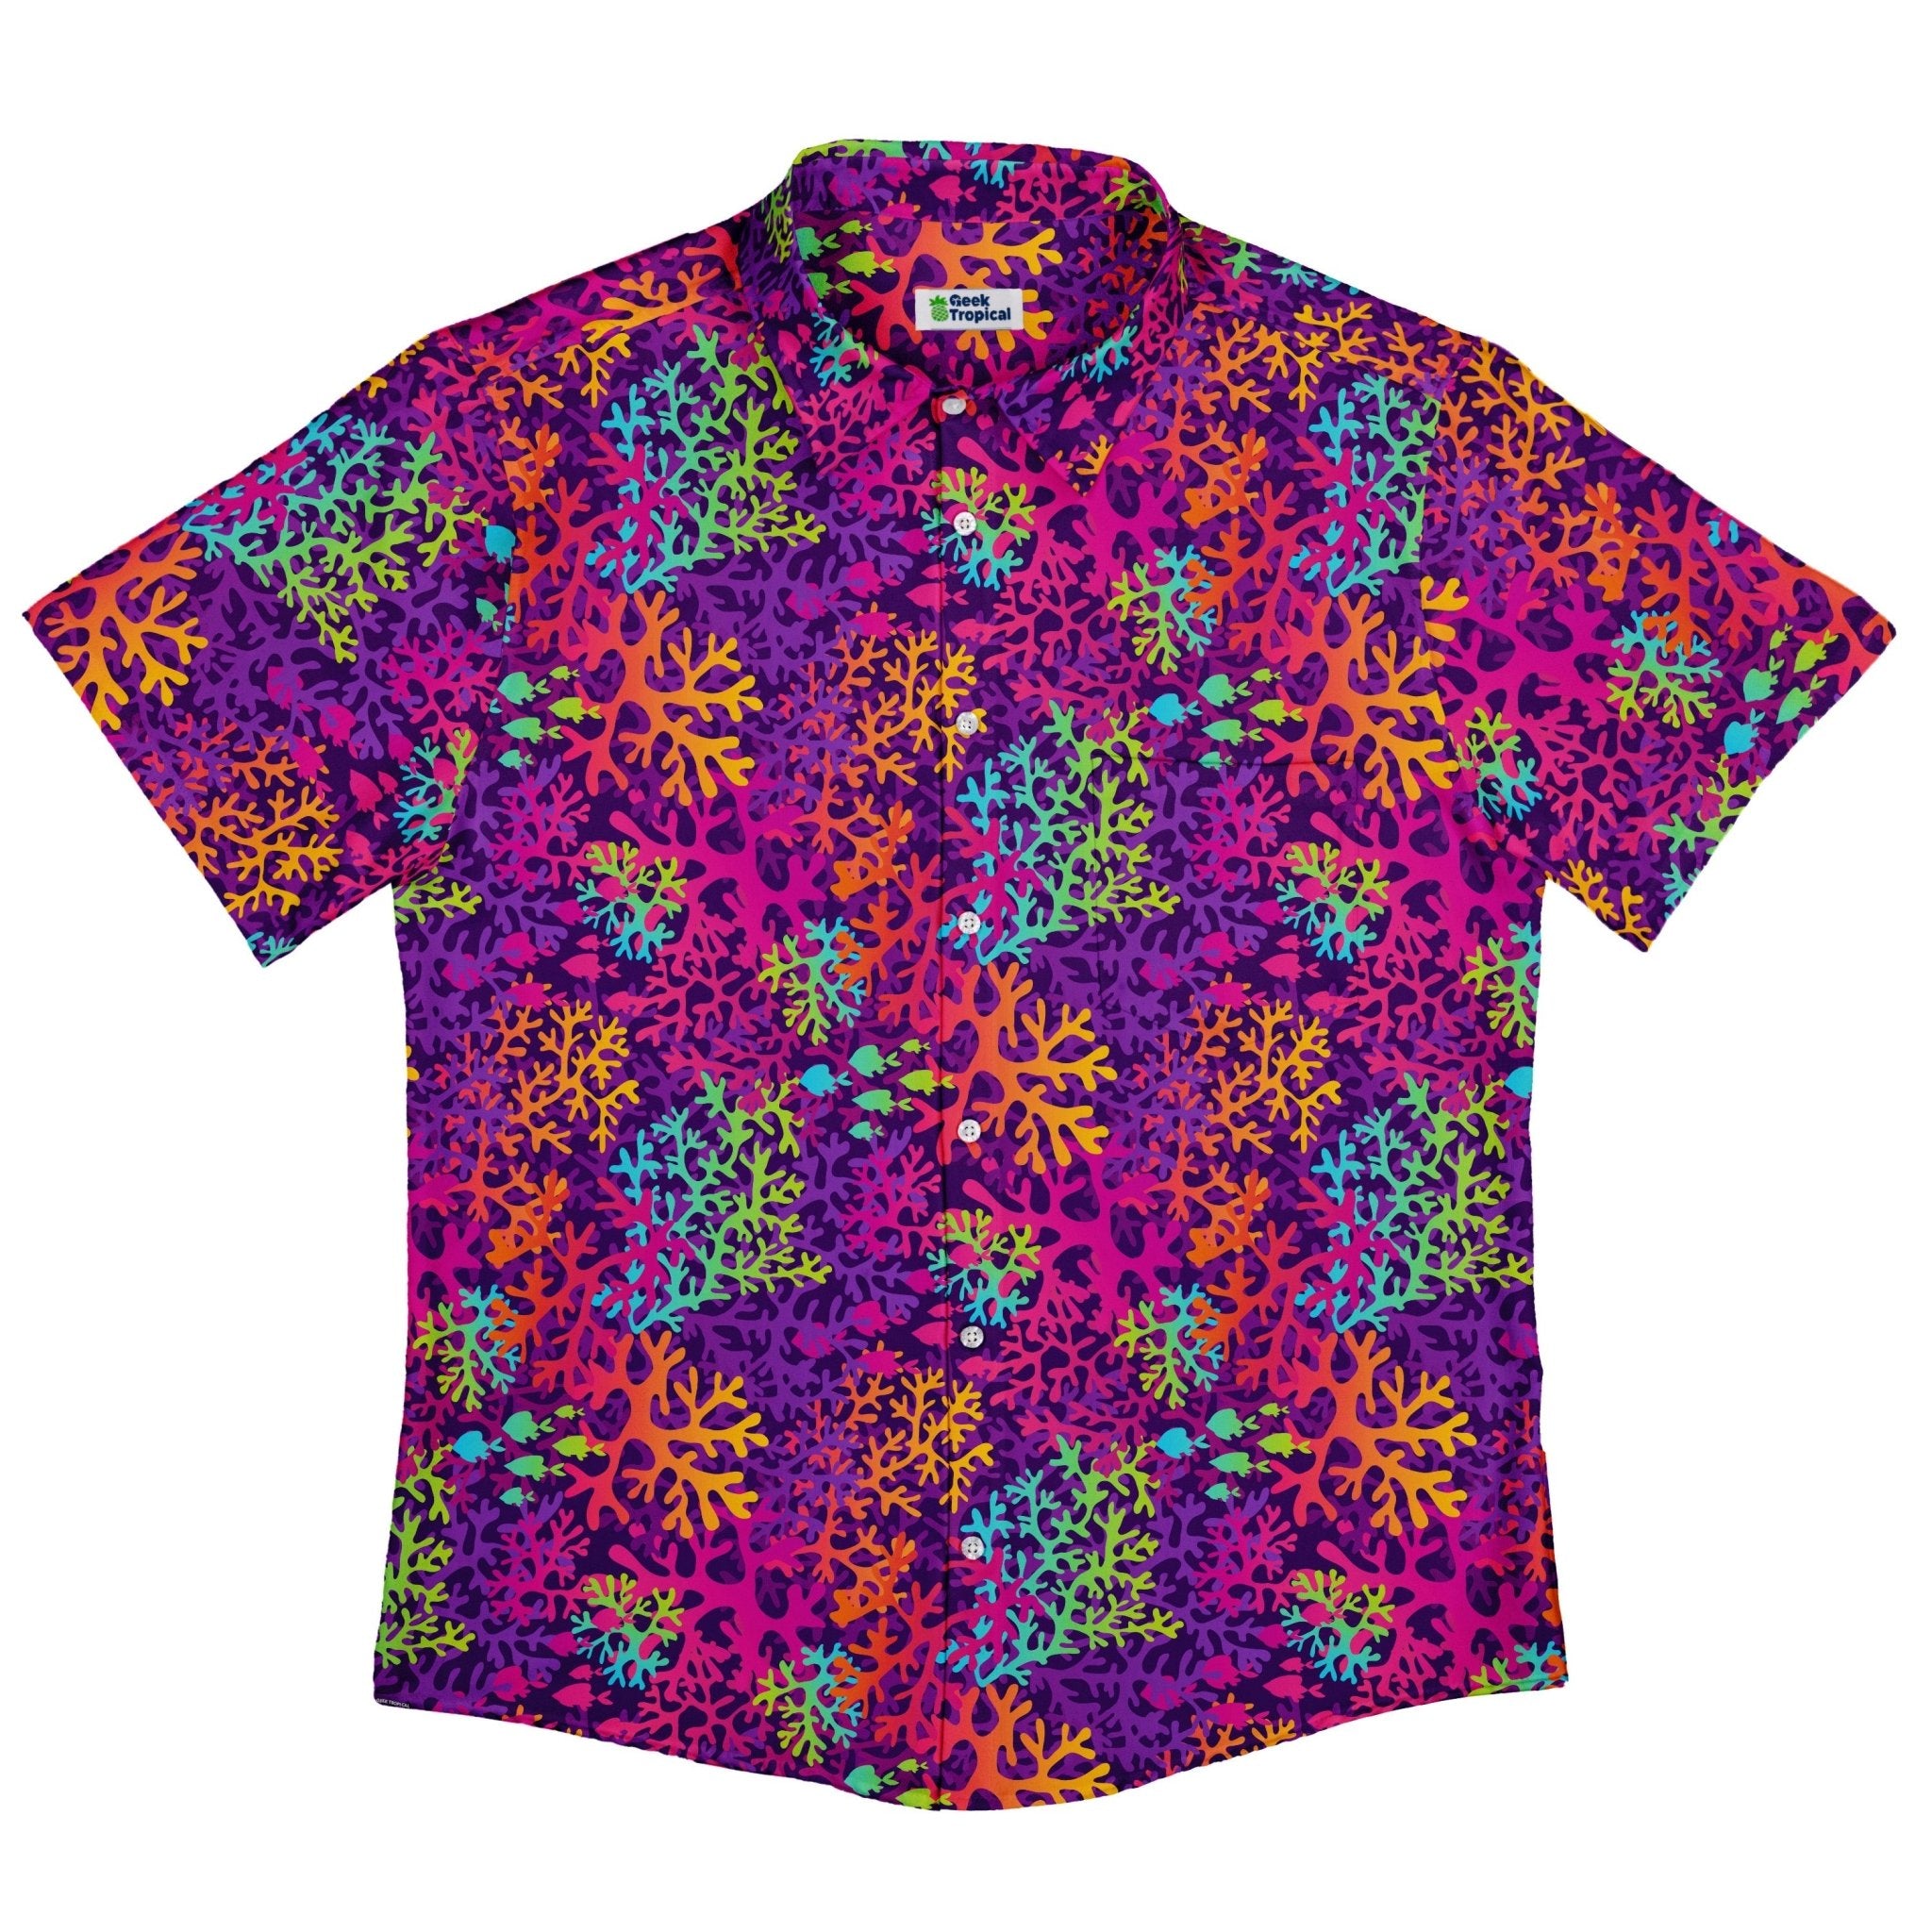 Science Marine Biology Rainbow Coral Button Up Shirt - adult sizing - Maximalist Patterns - science print